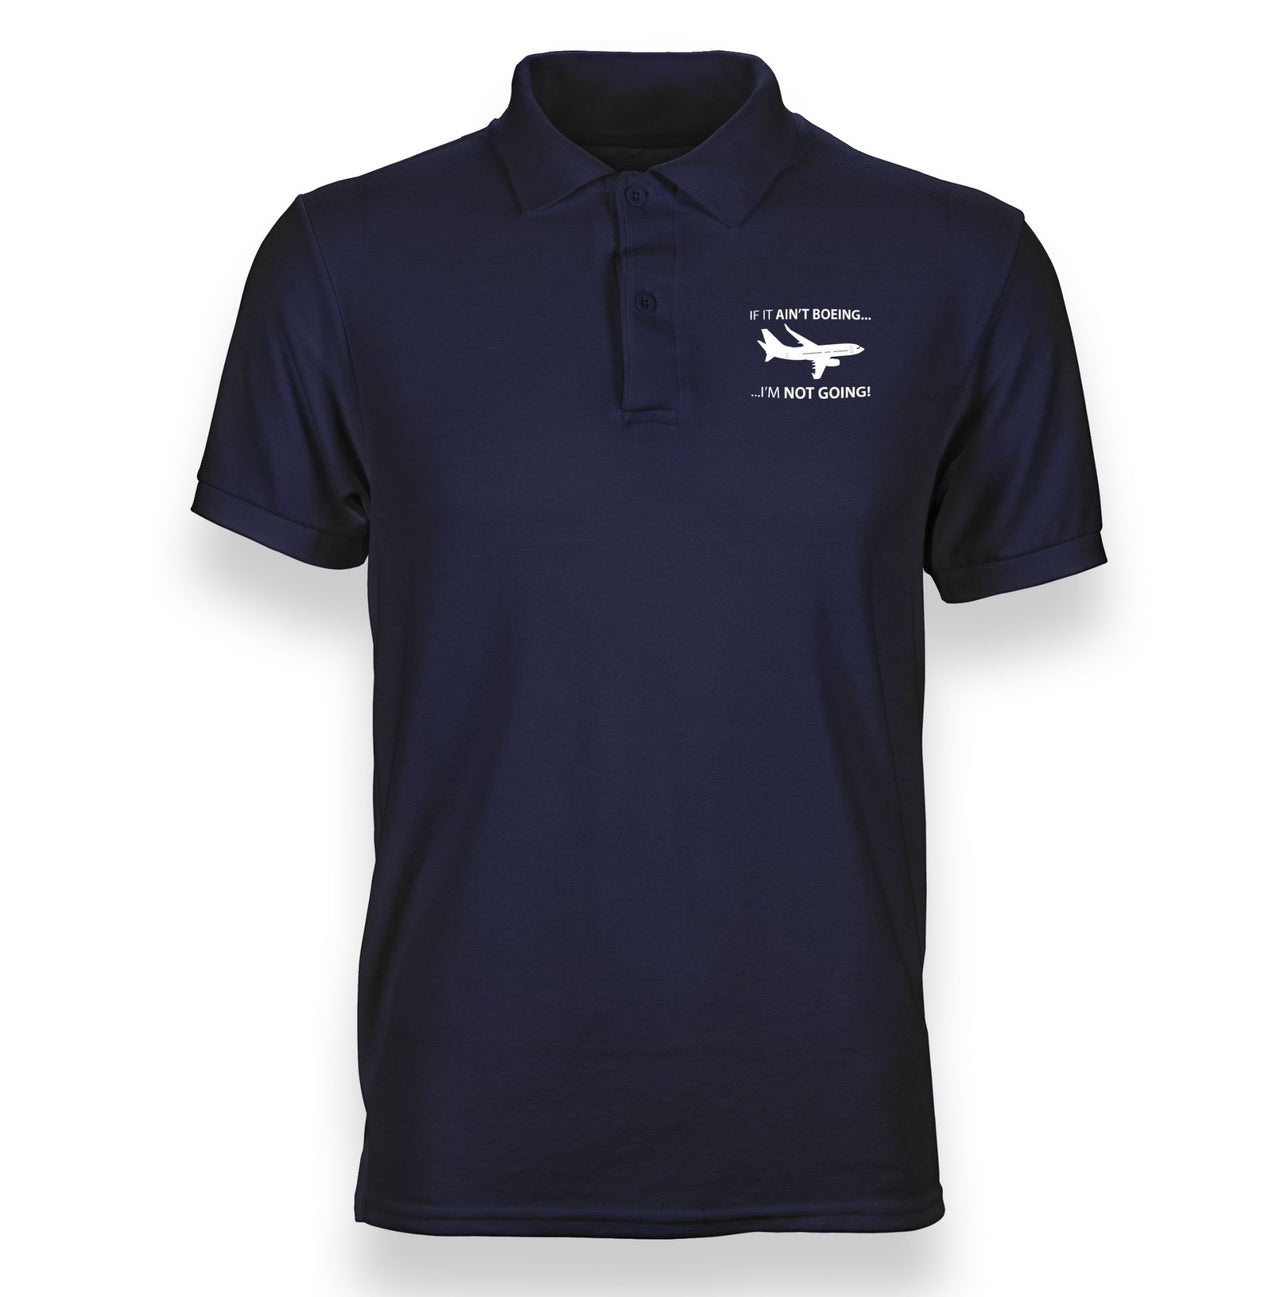 If It Ain't Boeing I'm Not Going! Designed "WOMEN" Polo T-Shirts